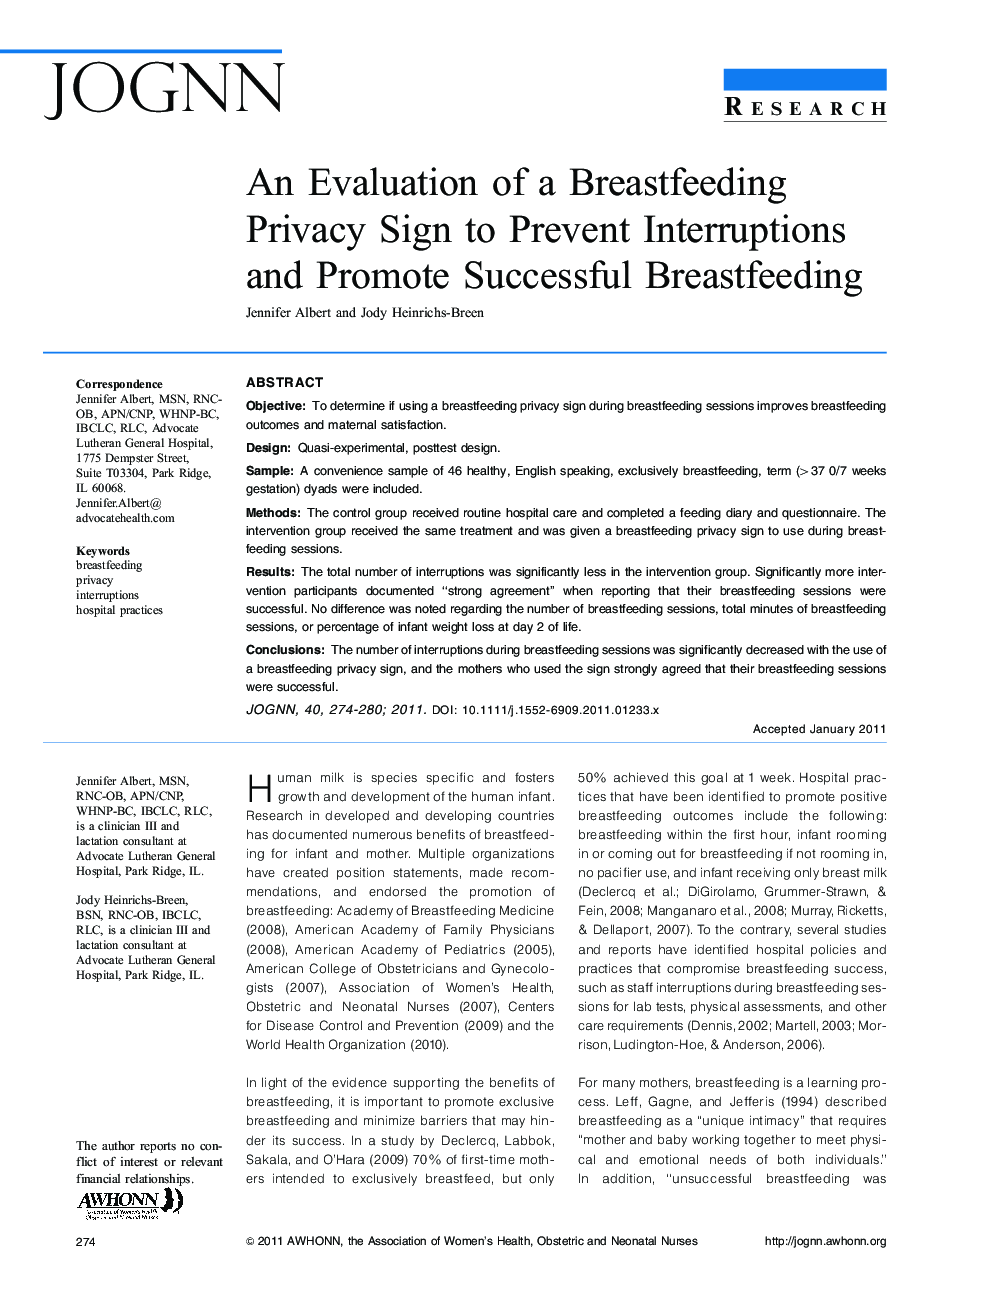 An Evaluation of a Breastfeeding Privacy Sign to Prevent Interruptions and Promote Successful Breastfeeding